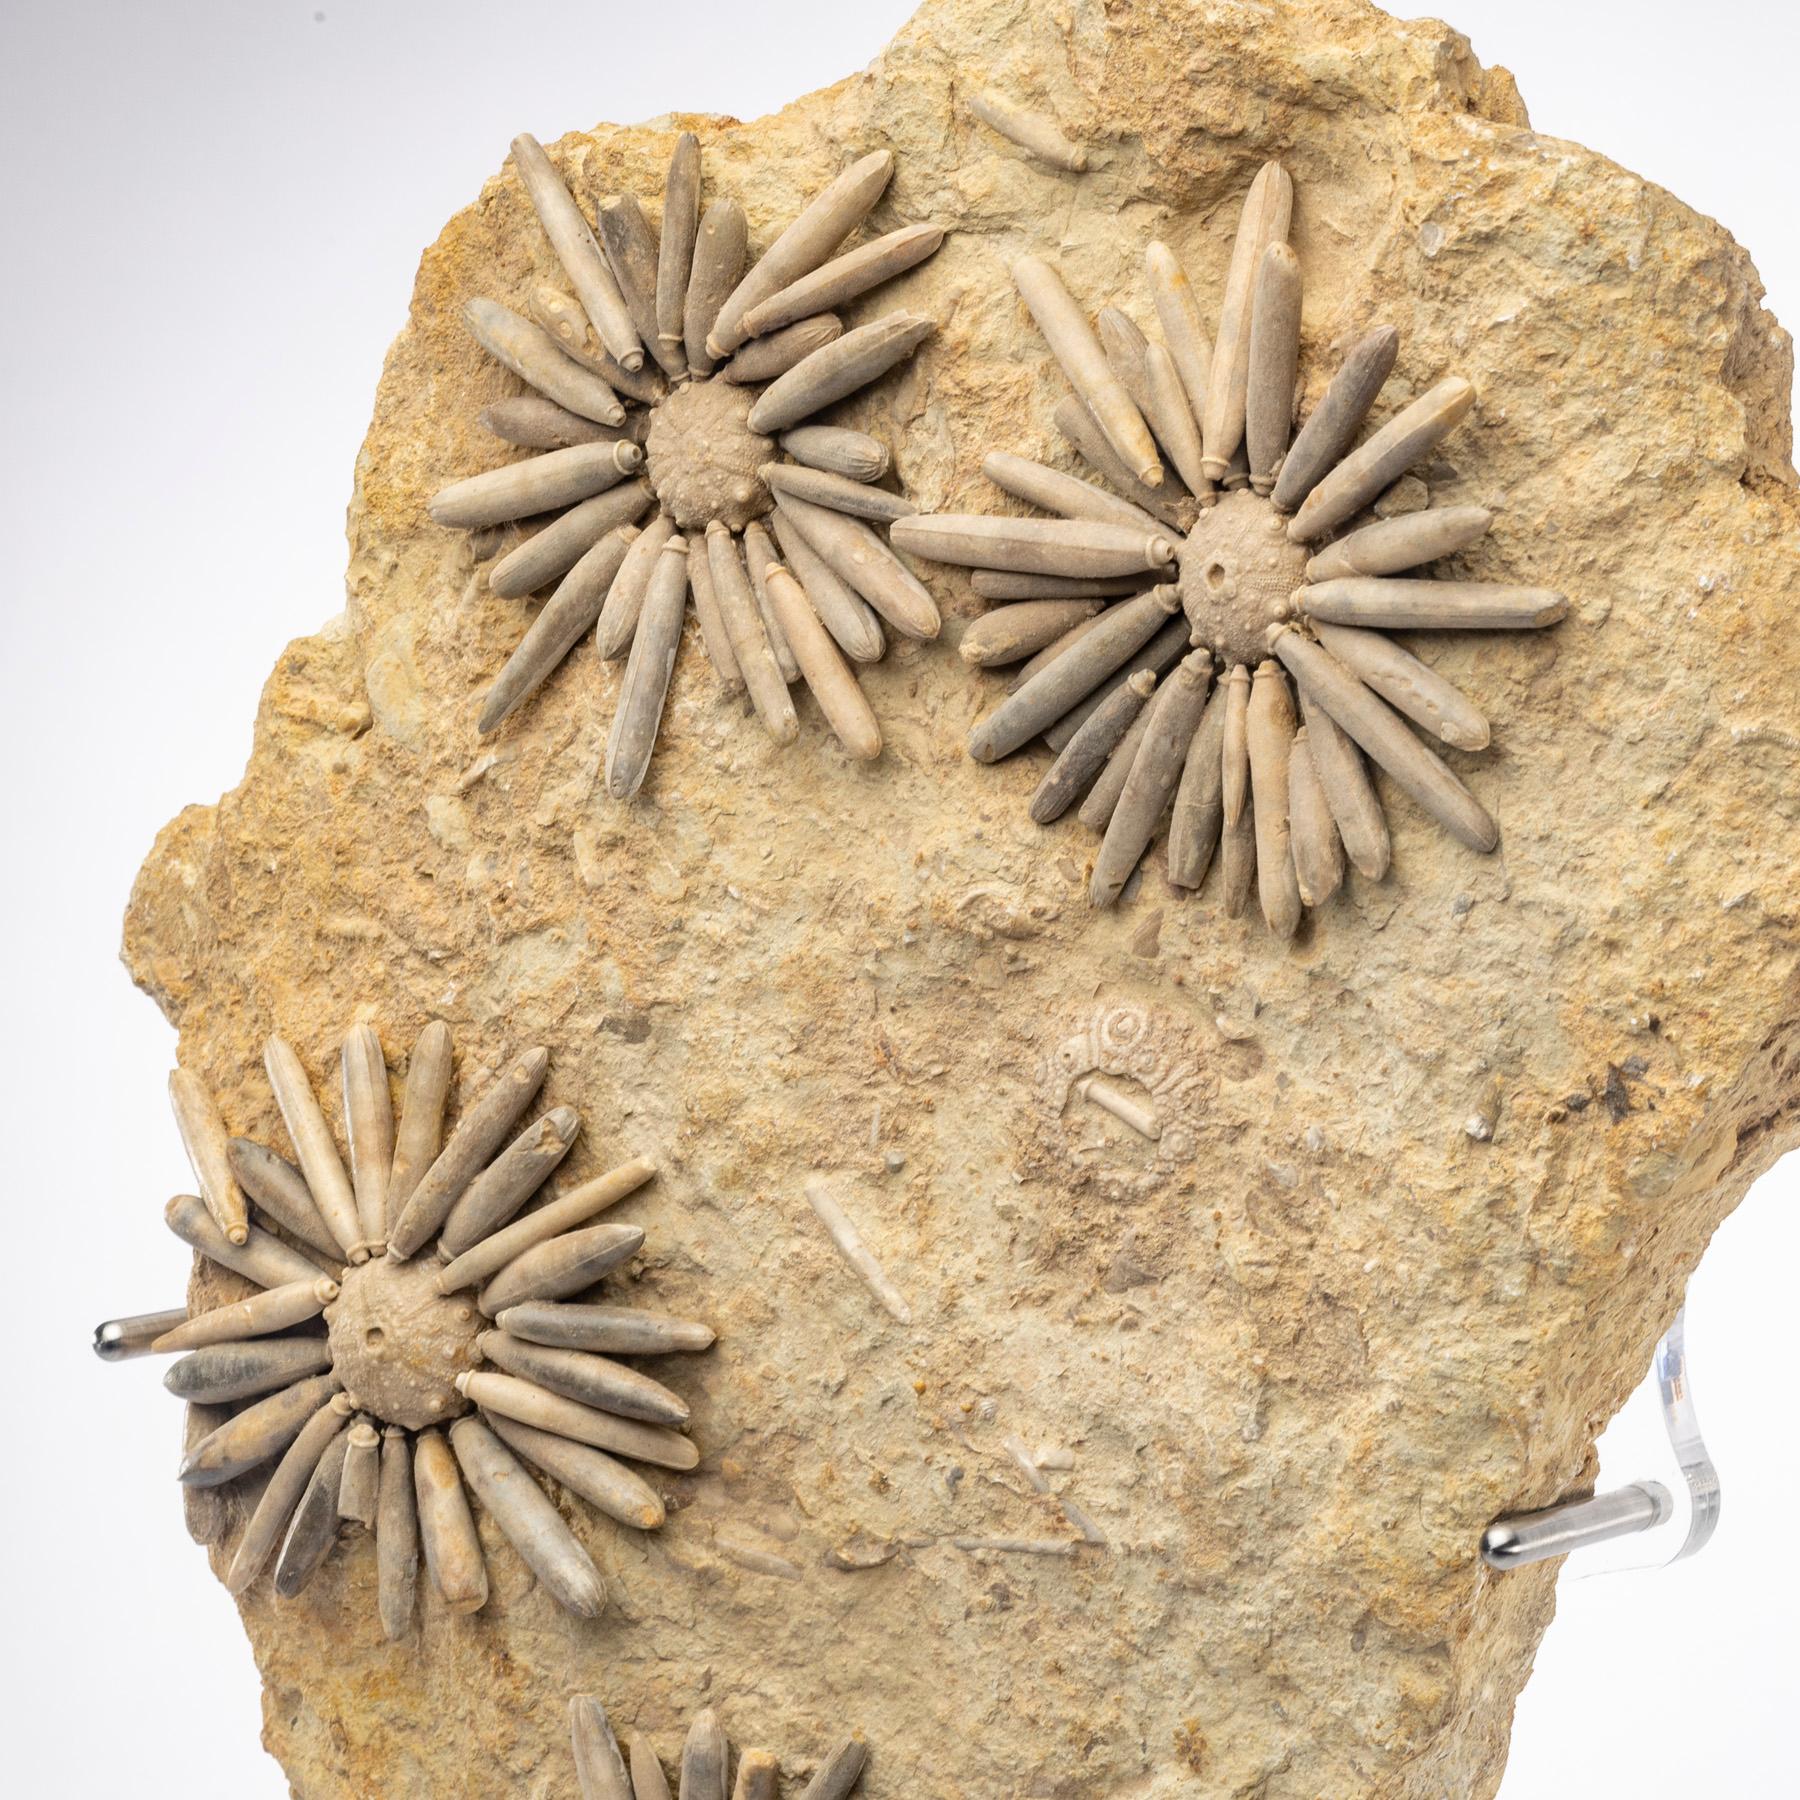 Polished Fossil Sea Urchin from Morocco, Early Jurassic '170 Million Years Old'